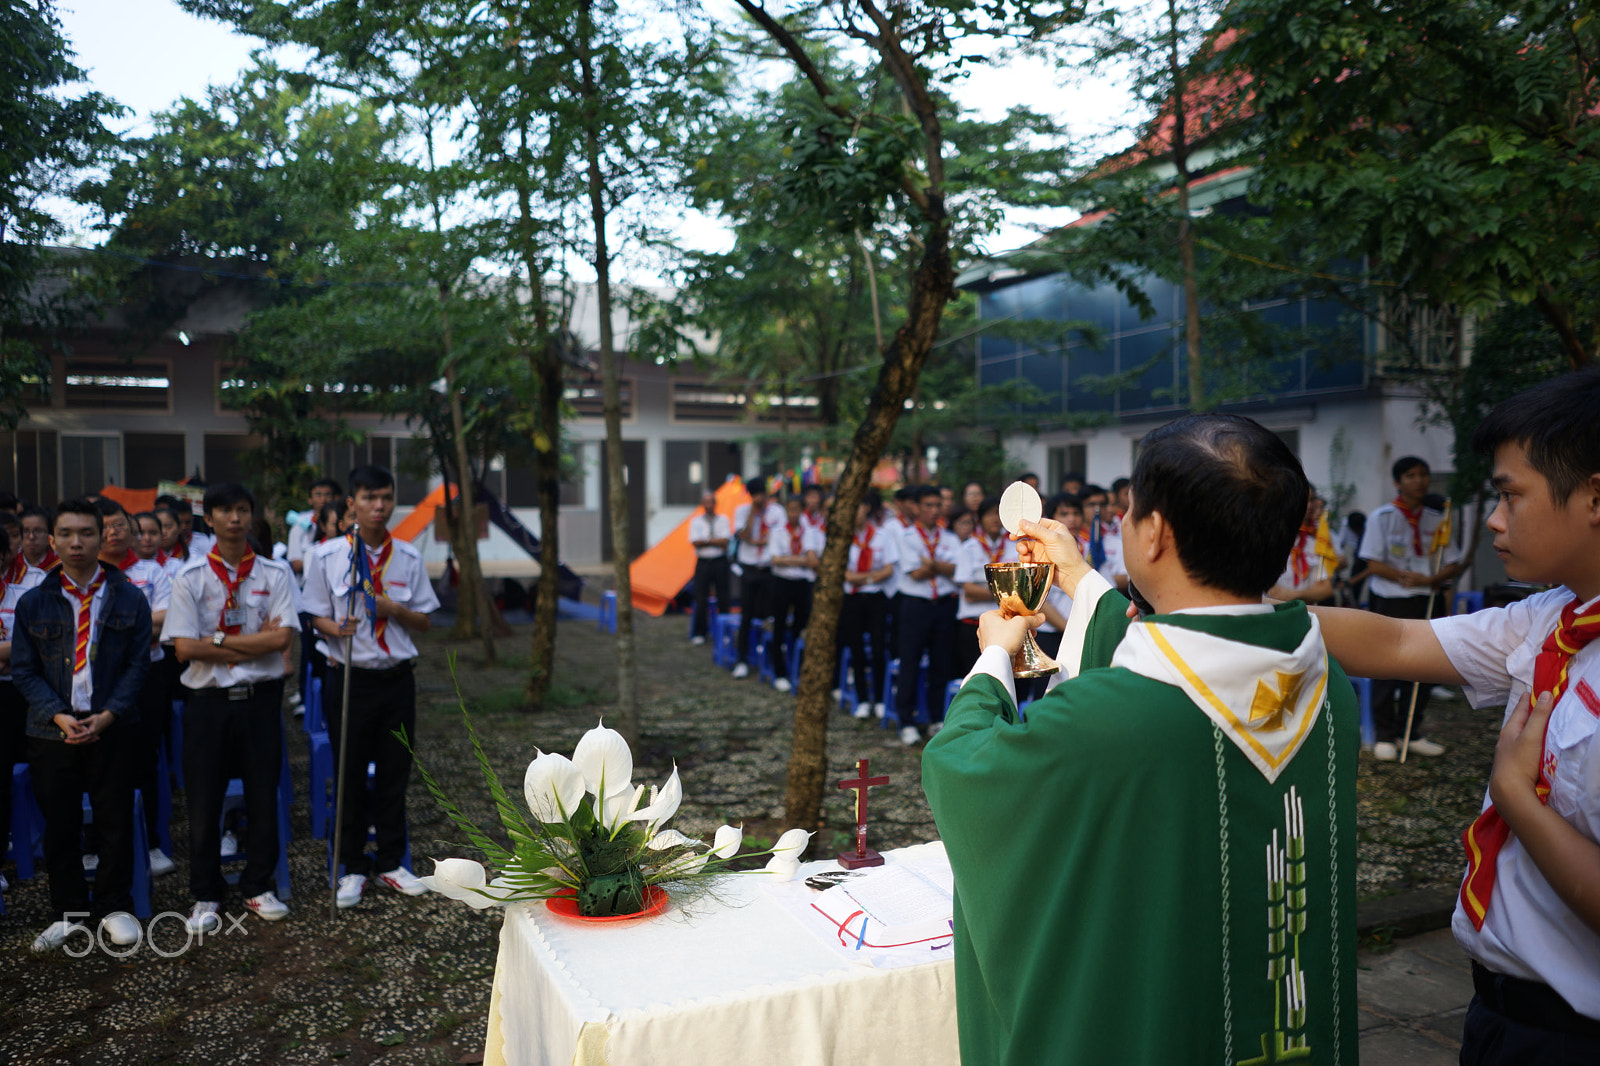 Sony a7 sample photo. Mass in eym camp photography